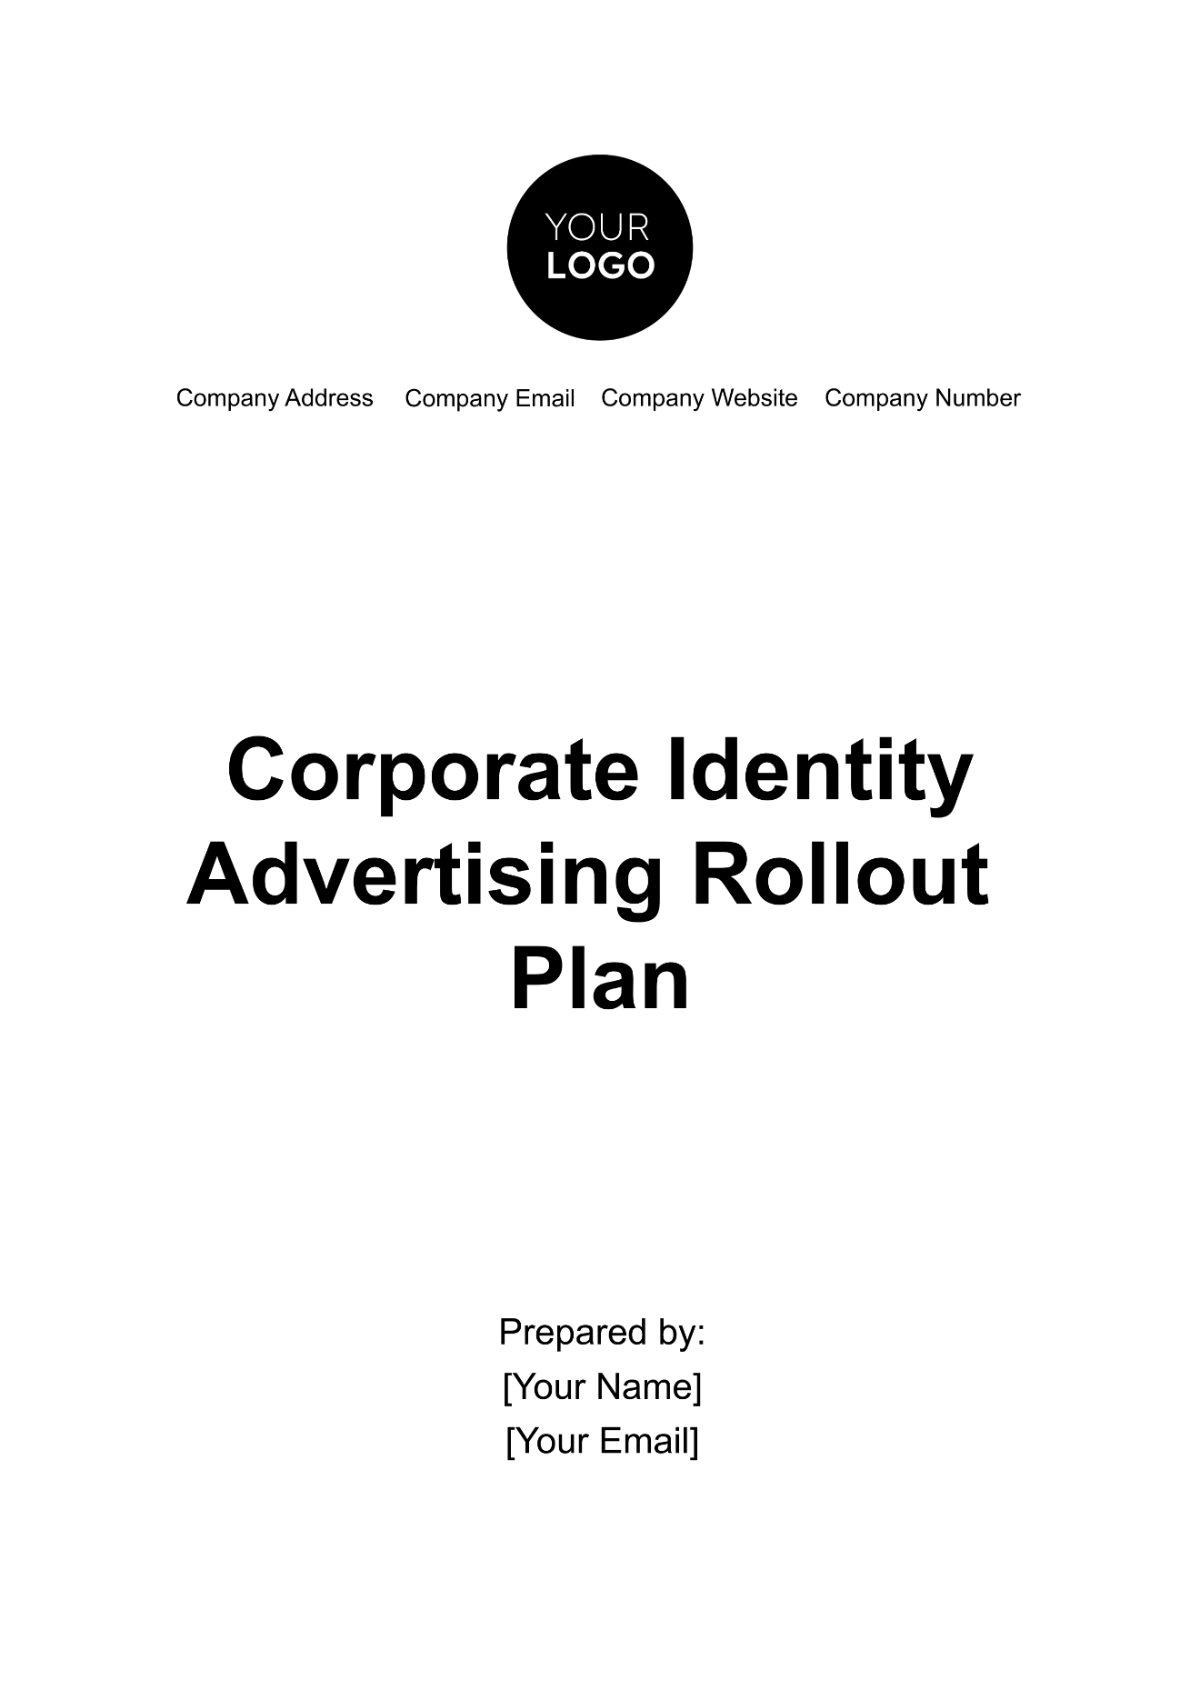 Corporate Identity Advertising Rollout Plan Template